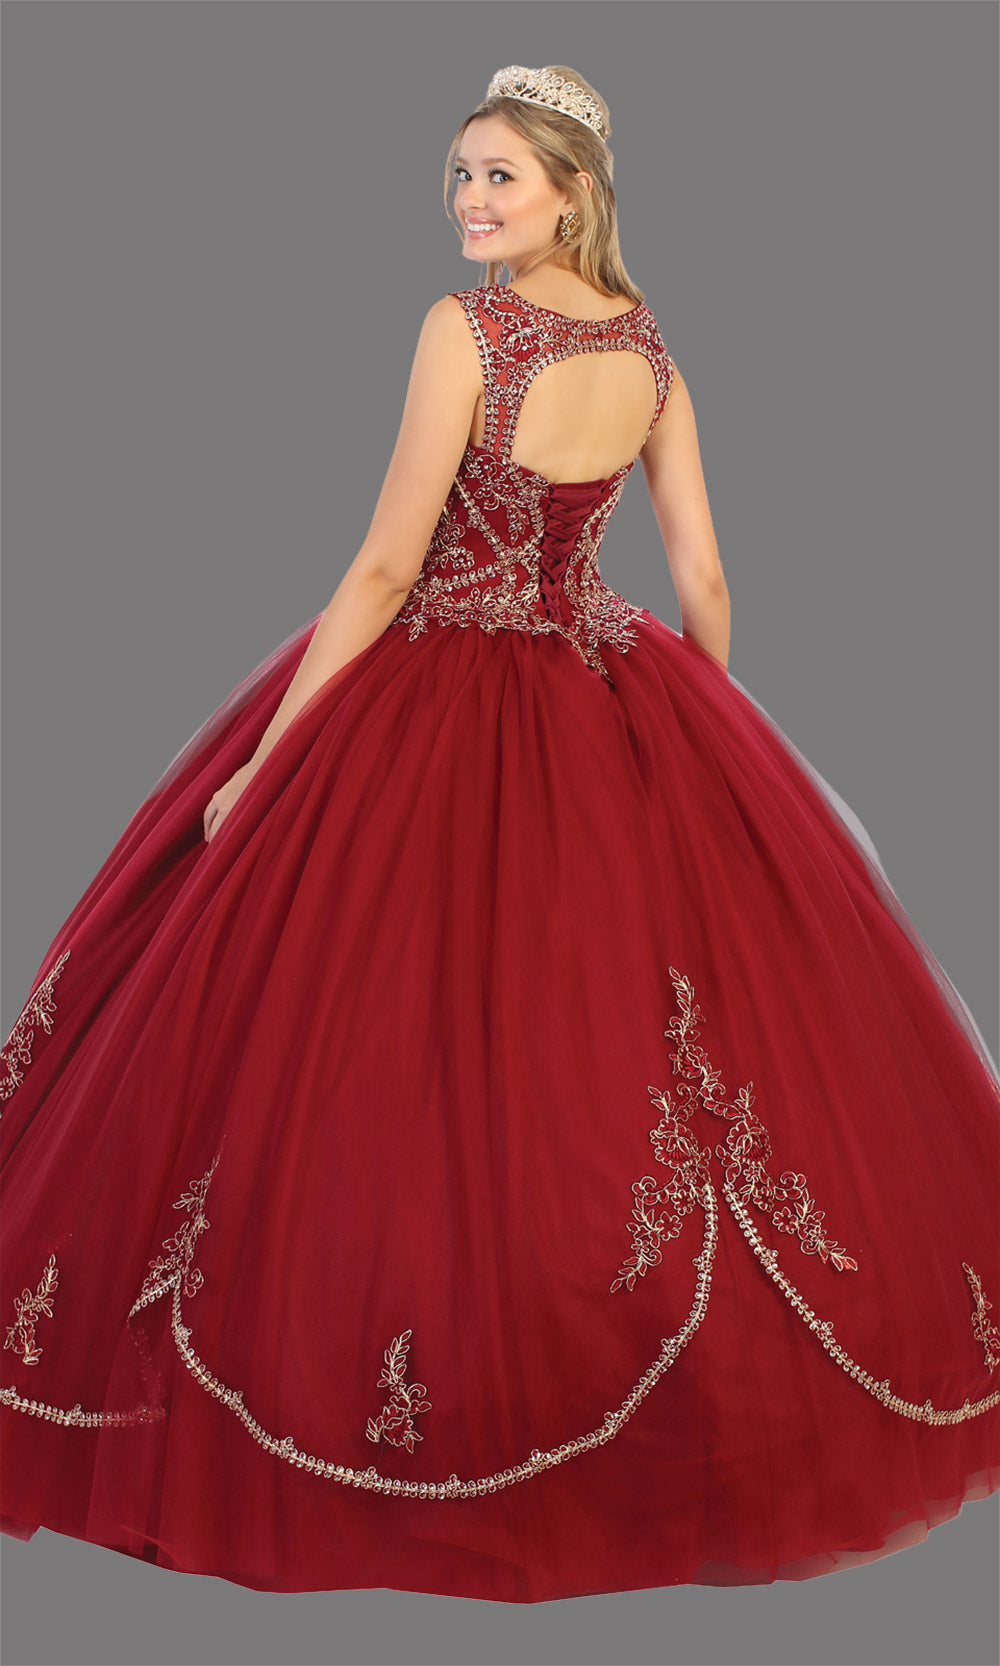 Mayqueen LK130 burgundy red quinceanera high neck ball gown w/gold sequin detail. Dark red ball gown is perfect for engagement dress, wedding reception, indowestern party gown, sweet 16, debut, sweet 15, sweet 18. Plus sizes available for ballgowns-b.jpg